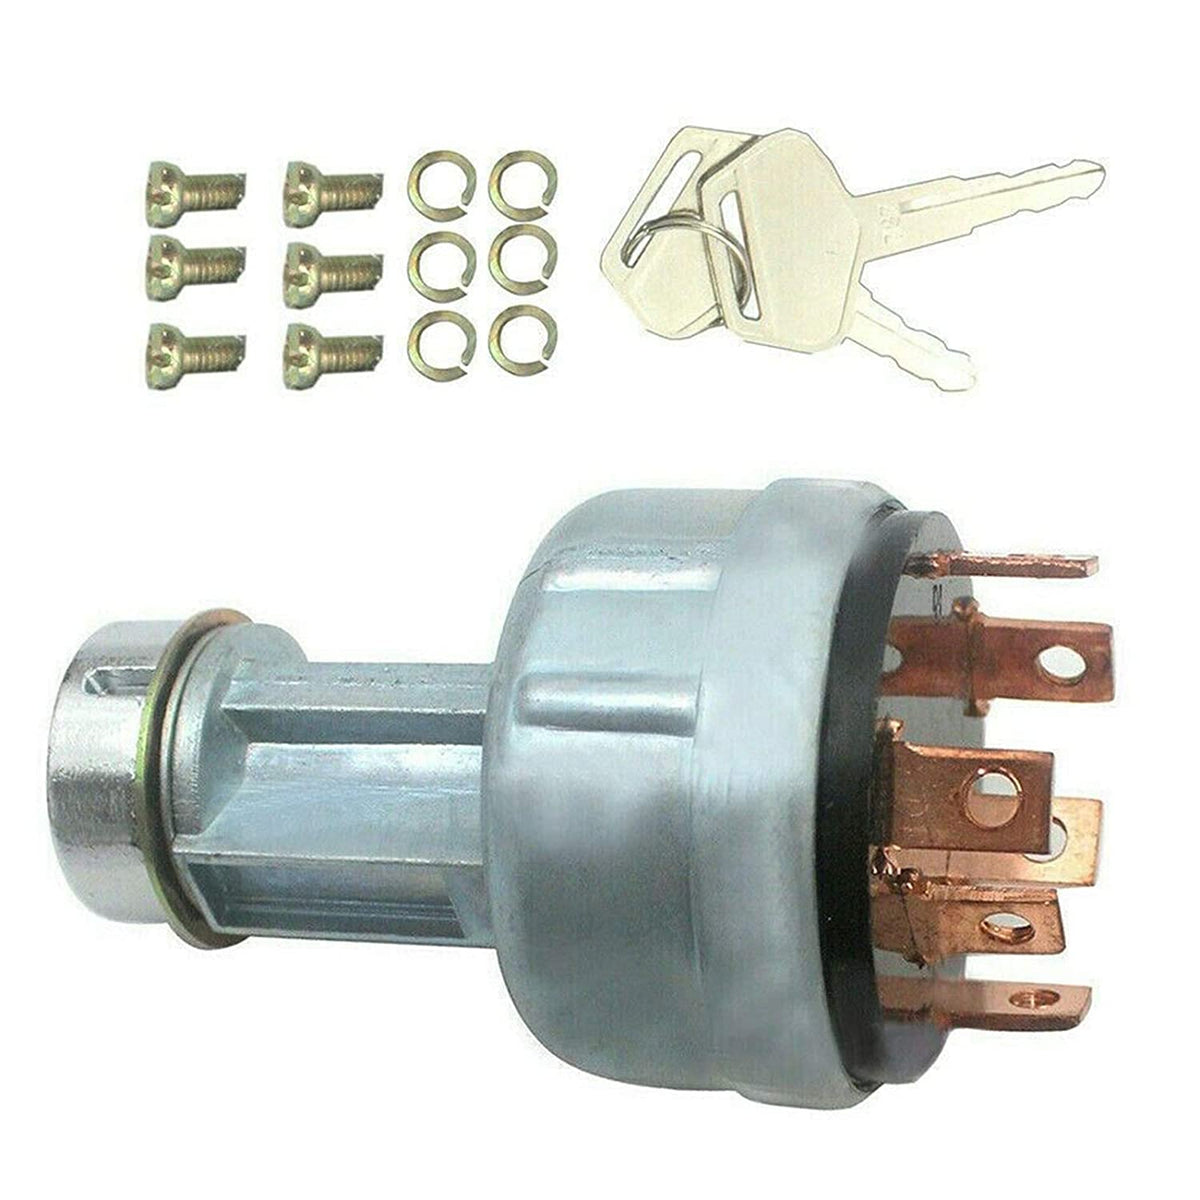 Ignition Starter Key Switch with 2 Keys 4 Position 6 Terminals 20Y-06-24680 22B-06-11910 08086-10000 Fit for Komatsu PC200-7 PC120-6 PC130-6 PC250-6 PC200-2 PC200-3 PC200-5 PC200-8 - KUDUPARTS